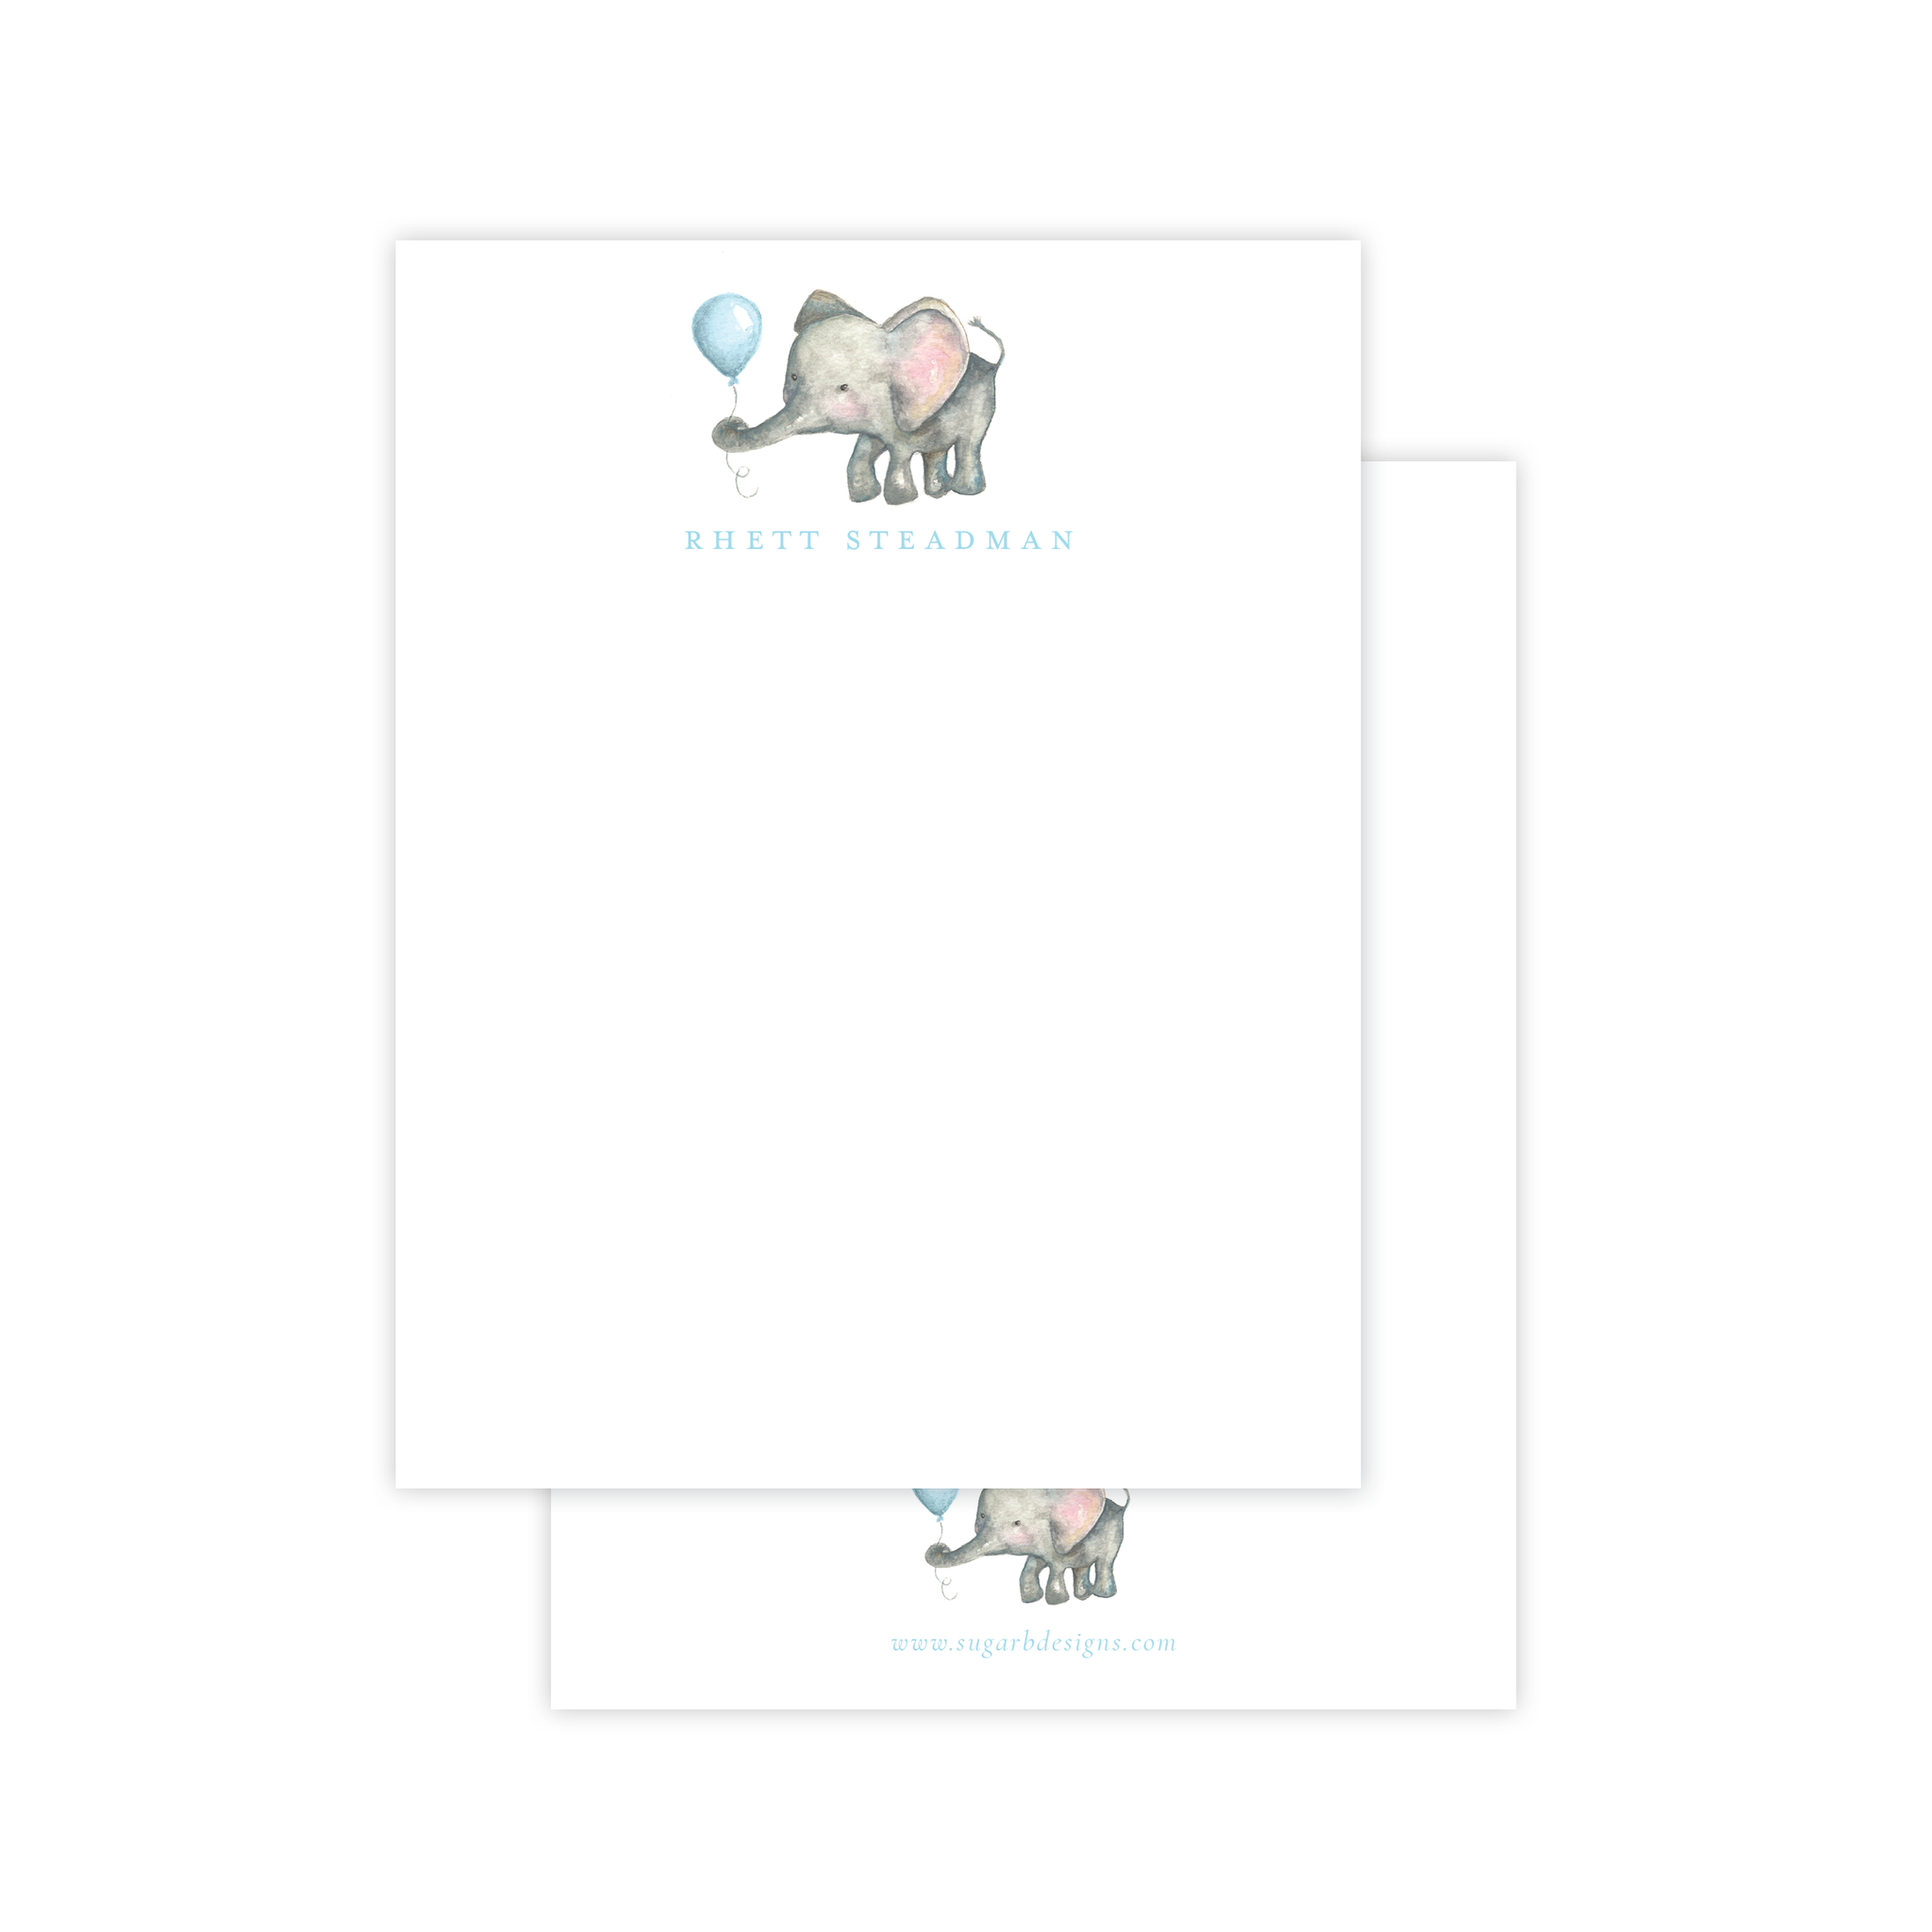 Elie and Balloon Blue Flat Stationery